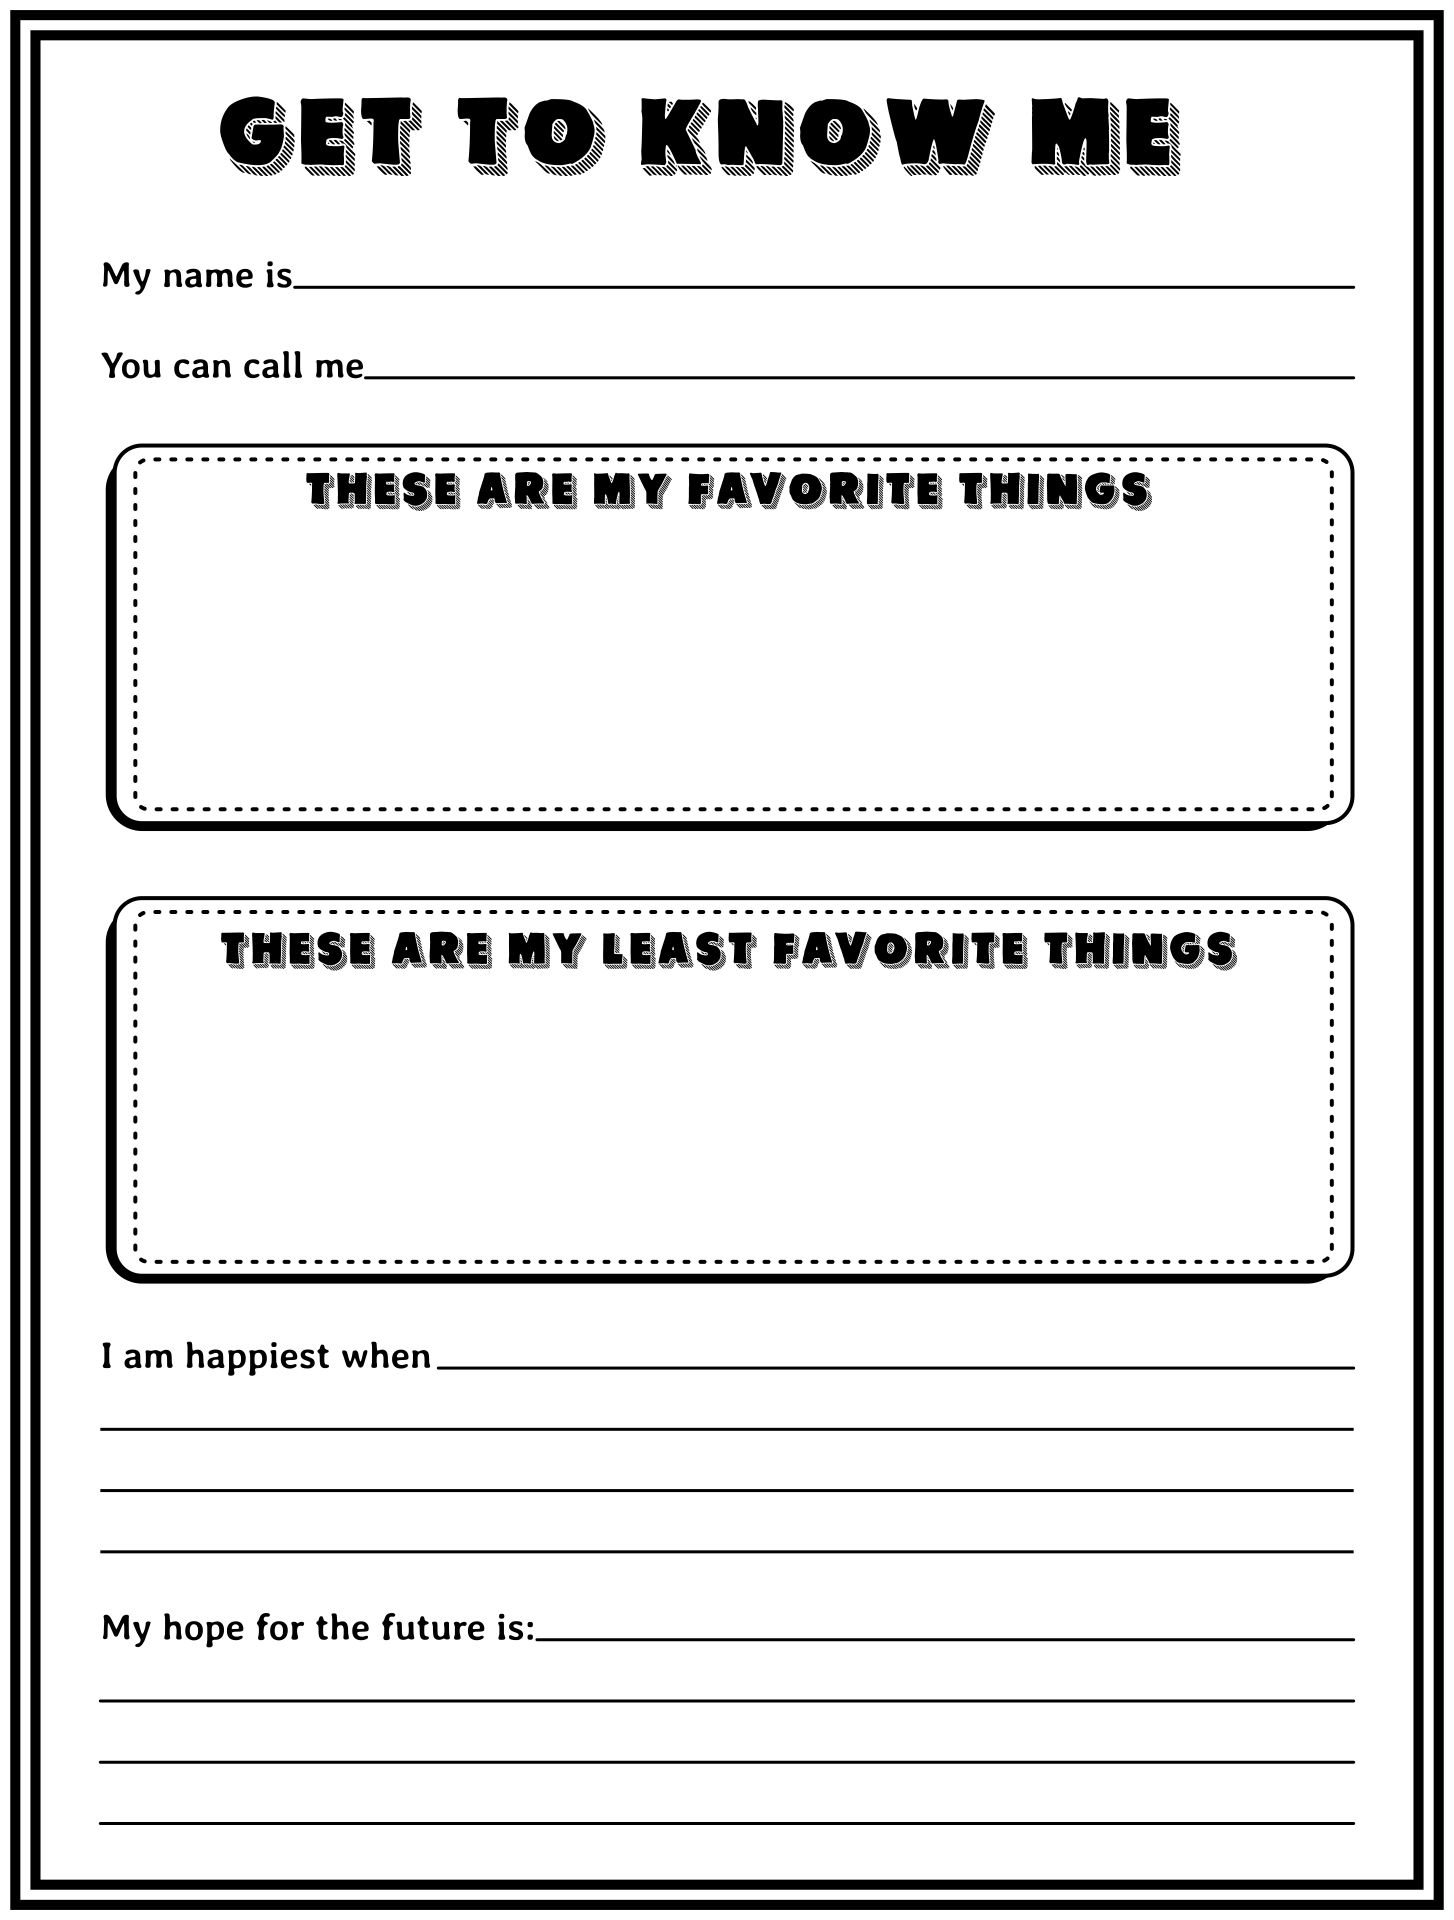 Printable Get To Know Me Template For Kindergarten